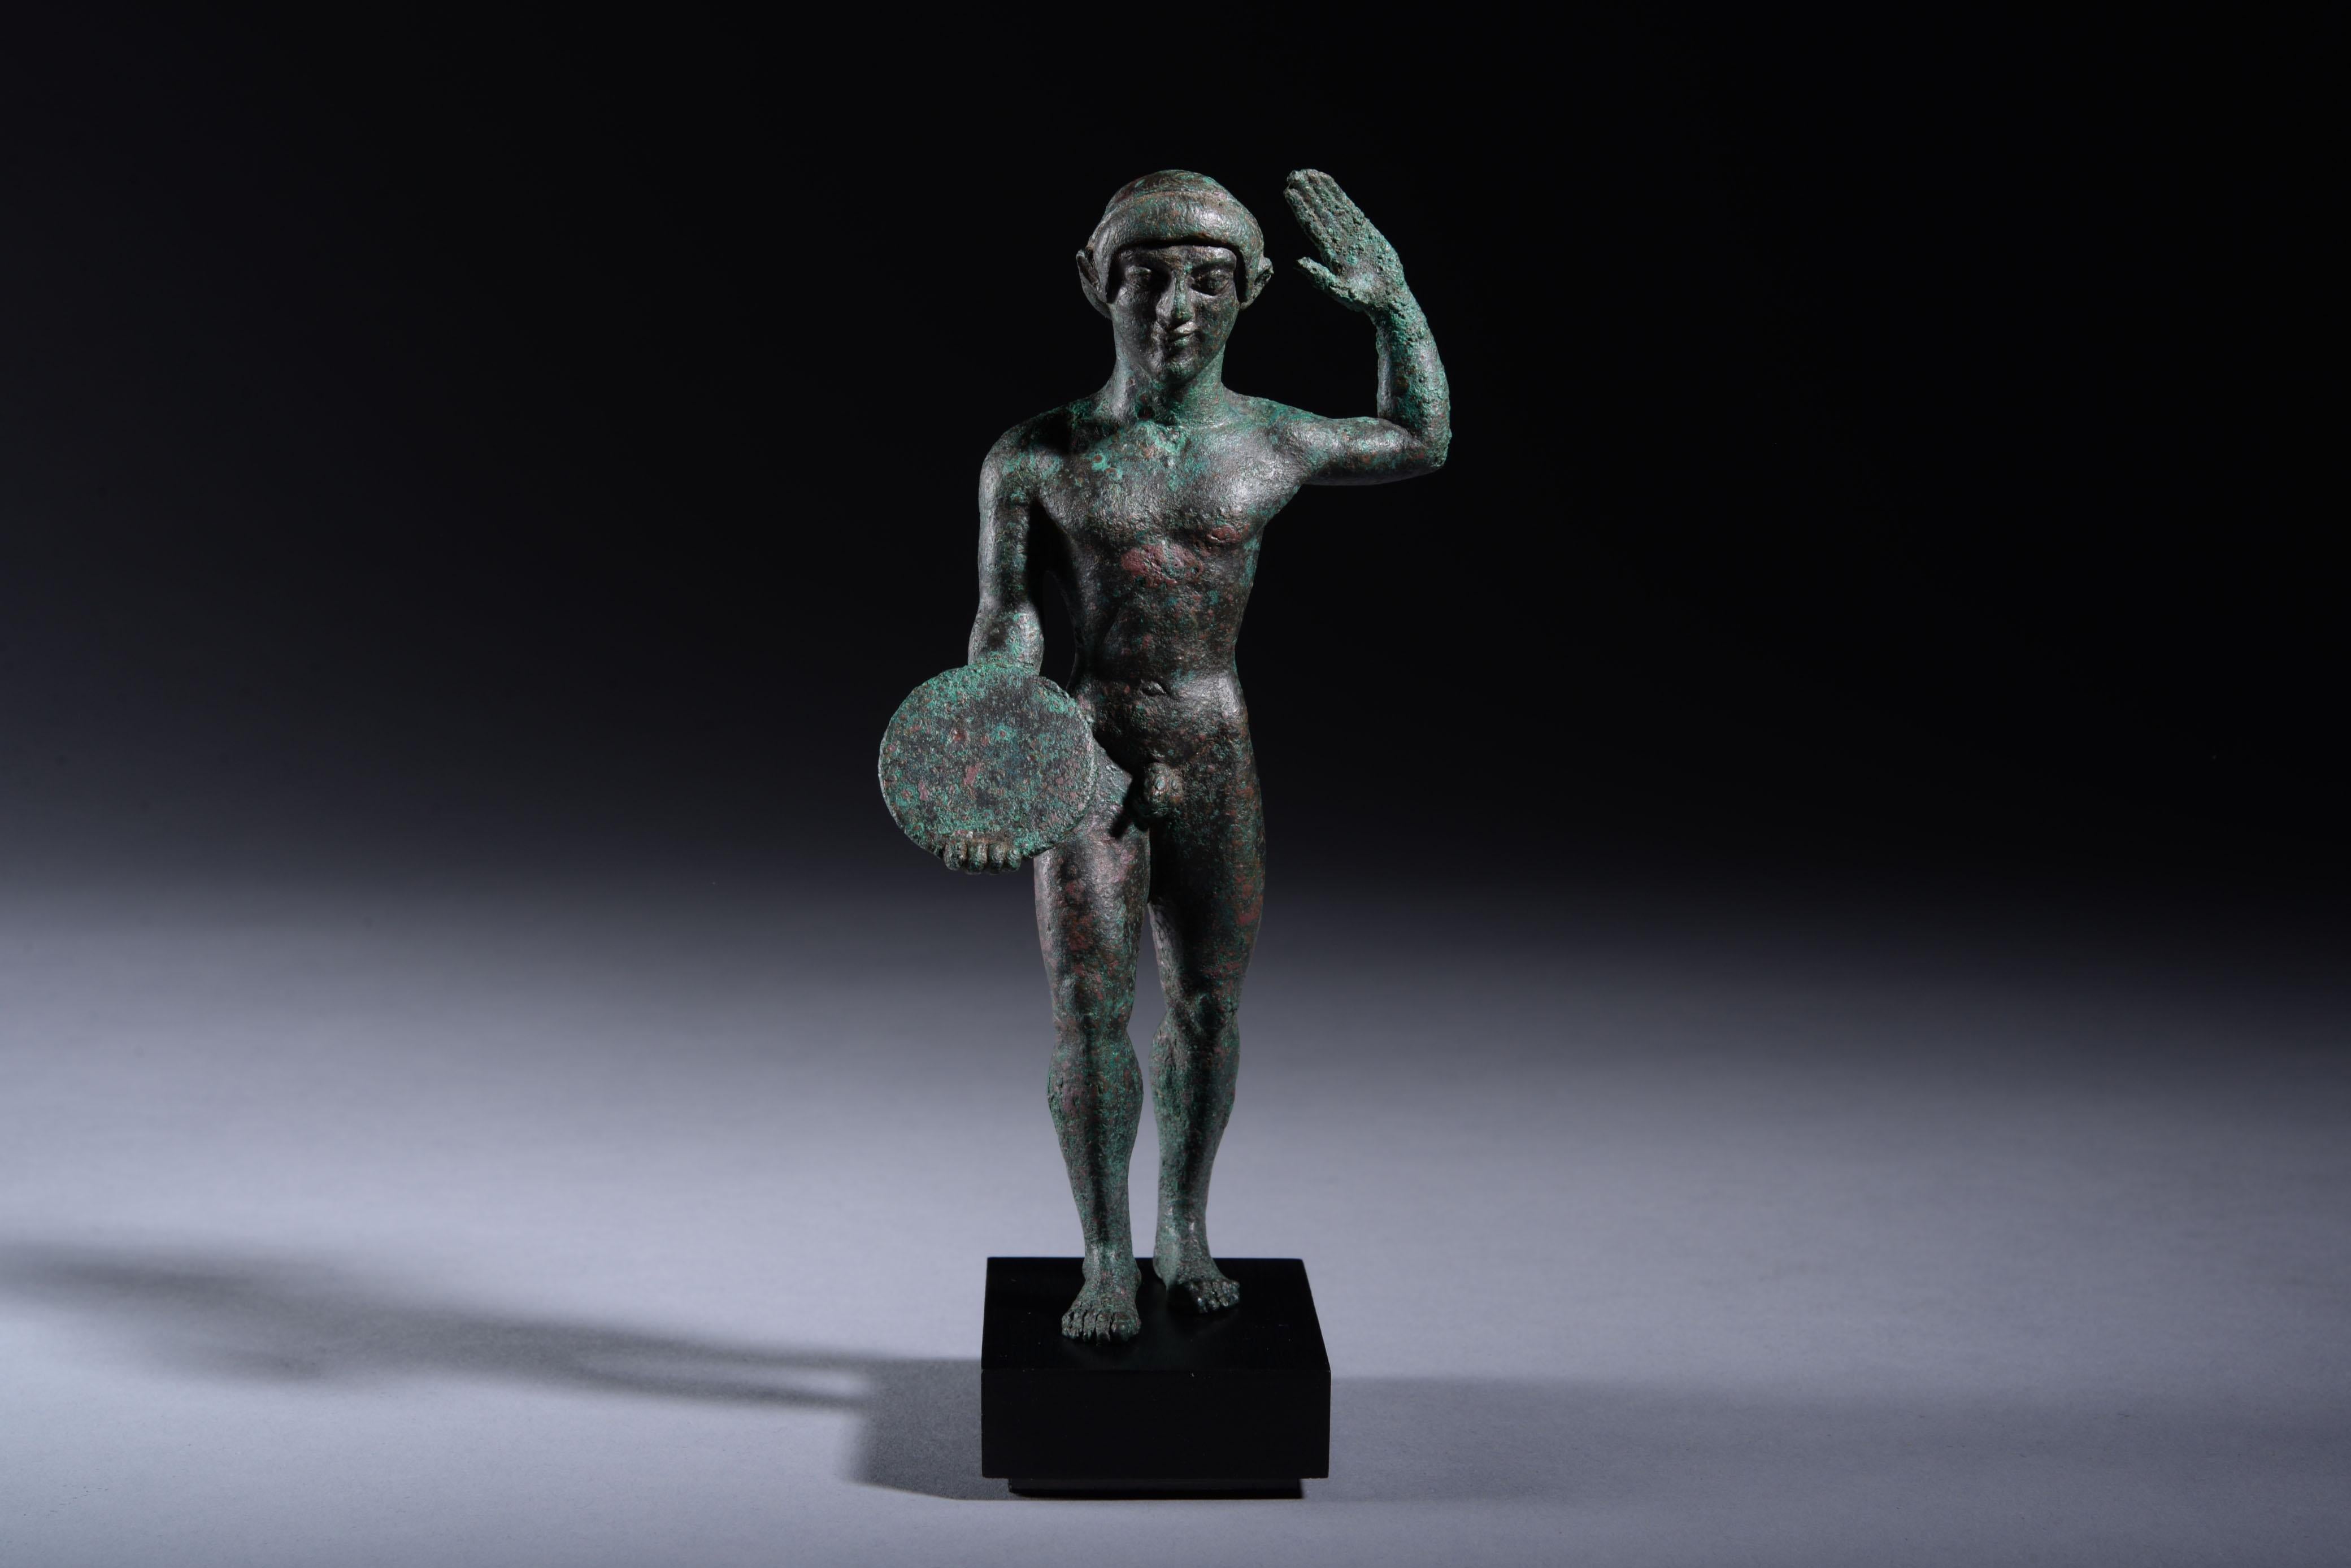 A remarkably fine example of Archaic sculpture.  A figure of a discophoros, or discus bearer, standing with his right leg forward, gripping a discus in his right hand, the left arm raised with an open palm. Described with admiration in Münzen und